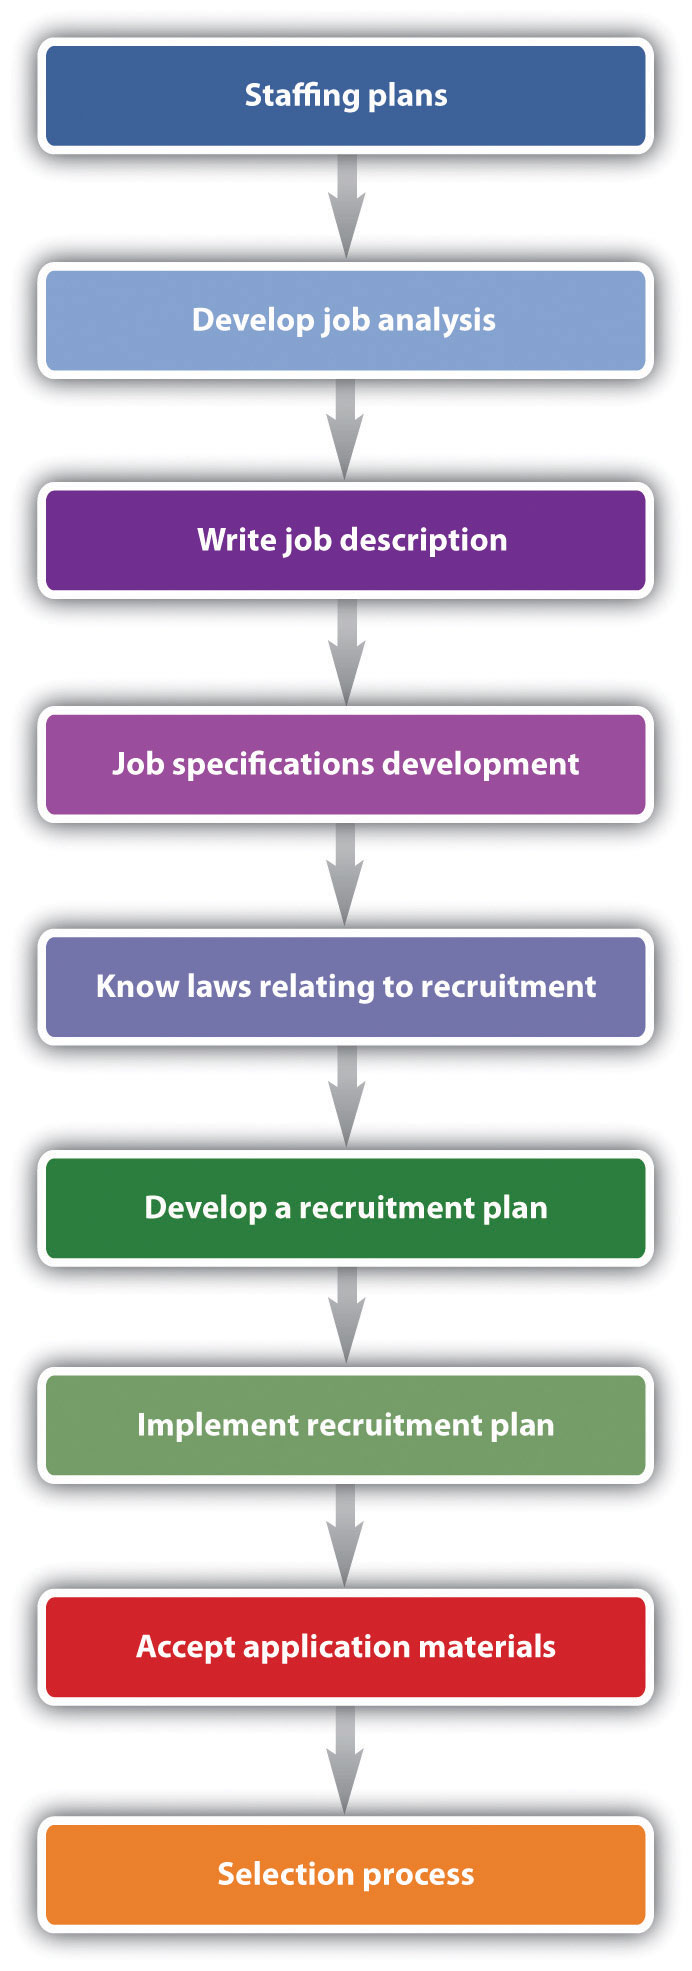 Overview of the steps to the recruitment process: staffing plans; develop job analysis; write job description; job specifications development; know lwas relating to recruitment; develop a recruitment plan; implement recruitment plan; accept application materials; selection process.